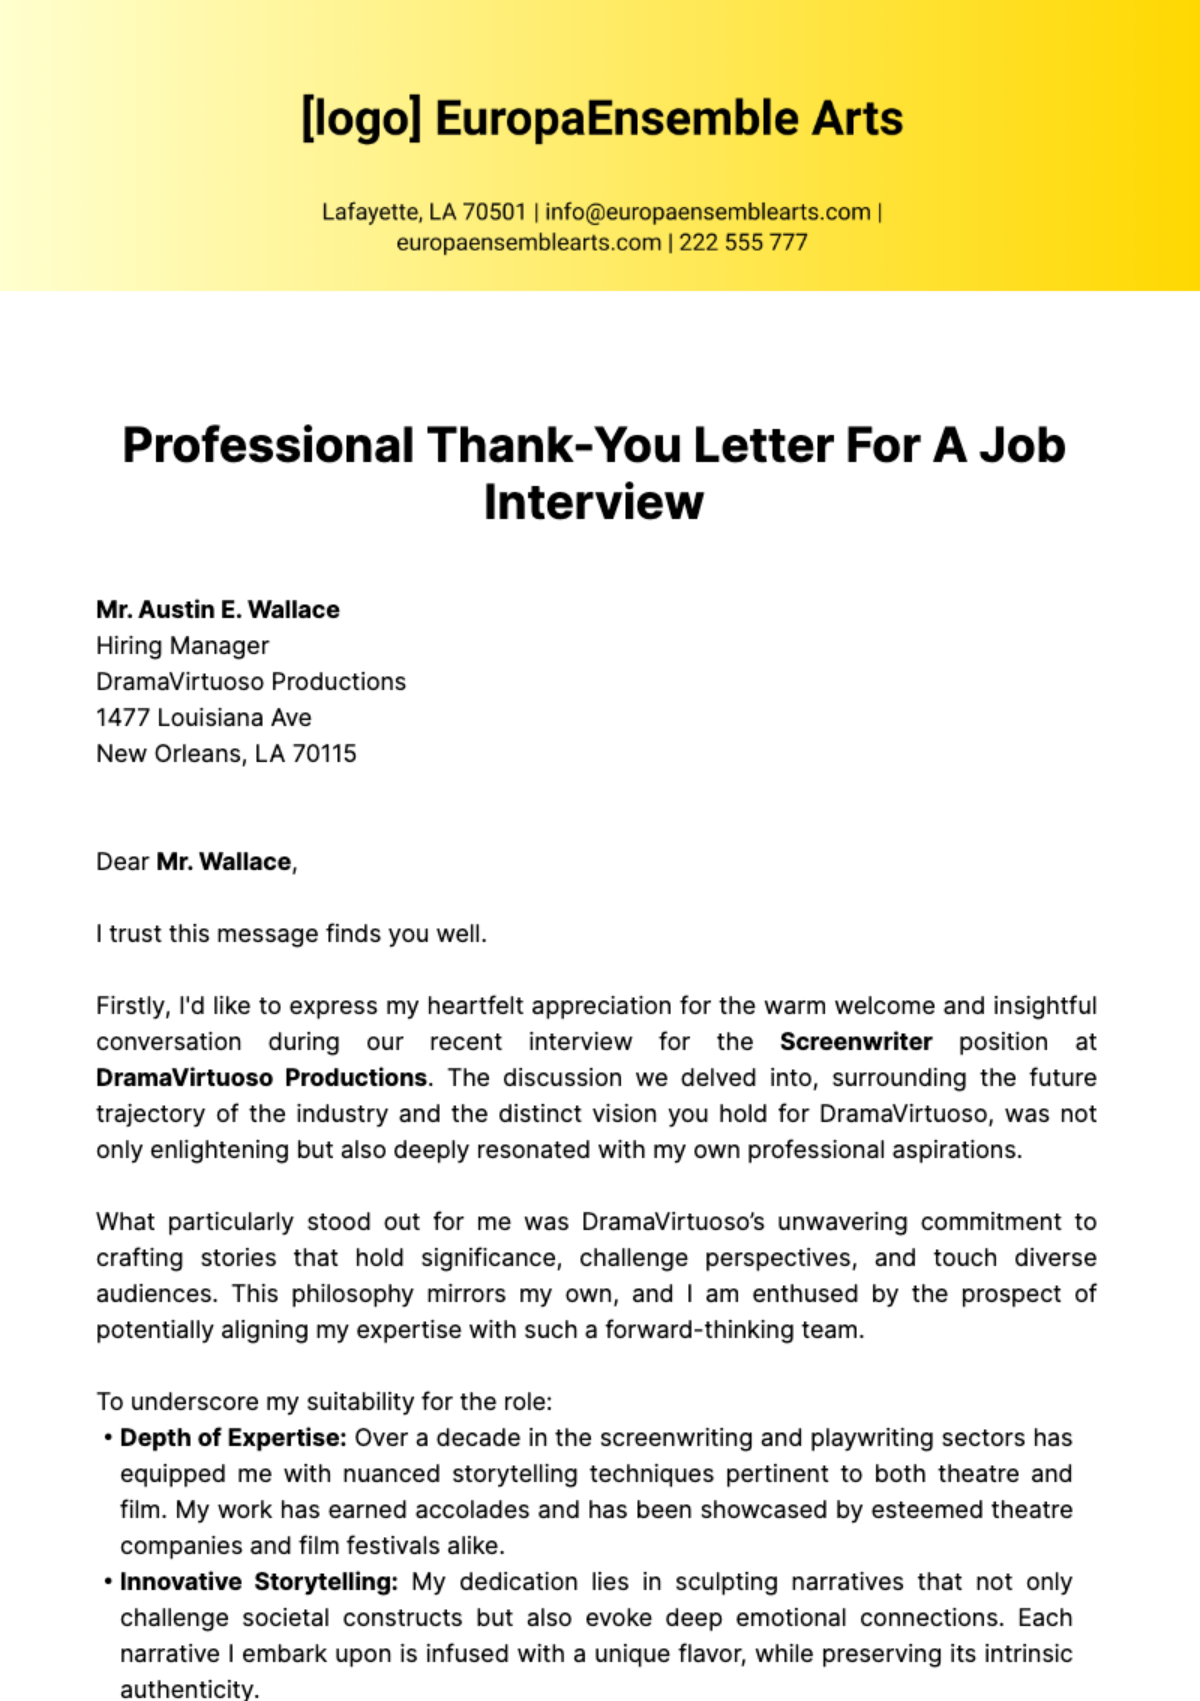 Professional Thank-You Letter for a Job Interview Template